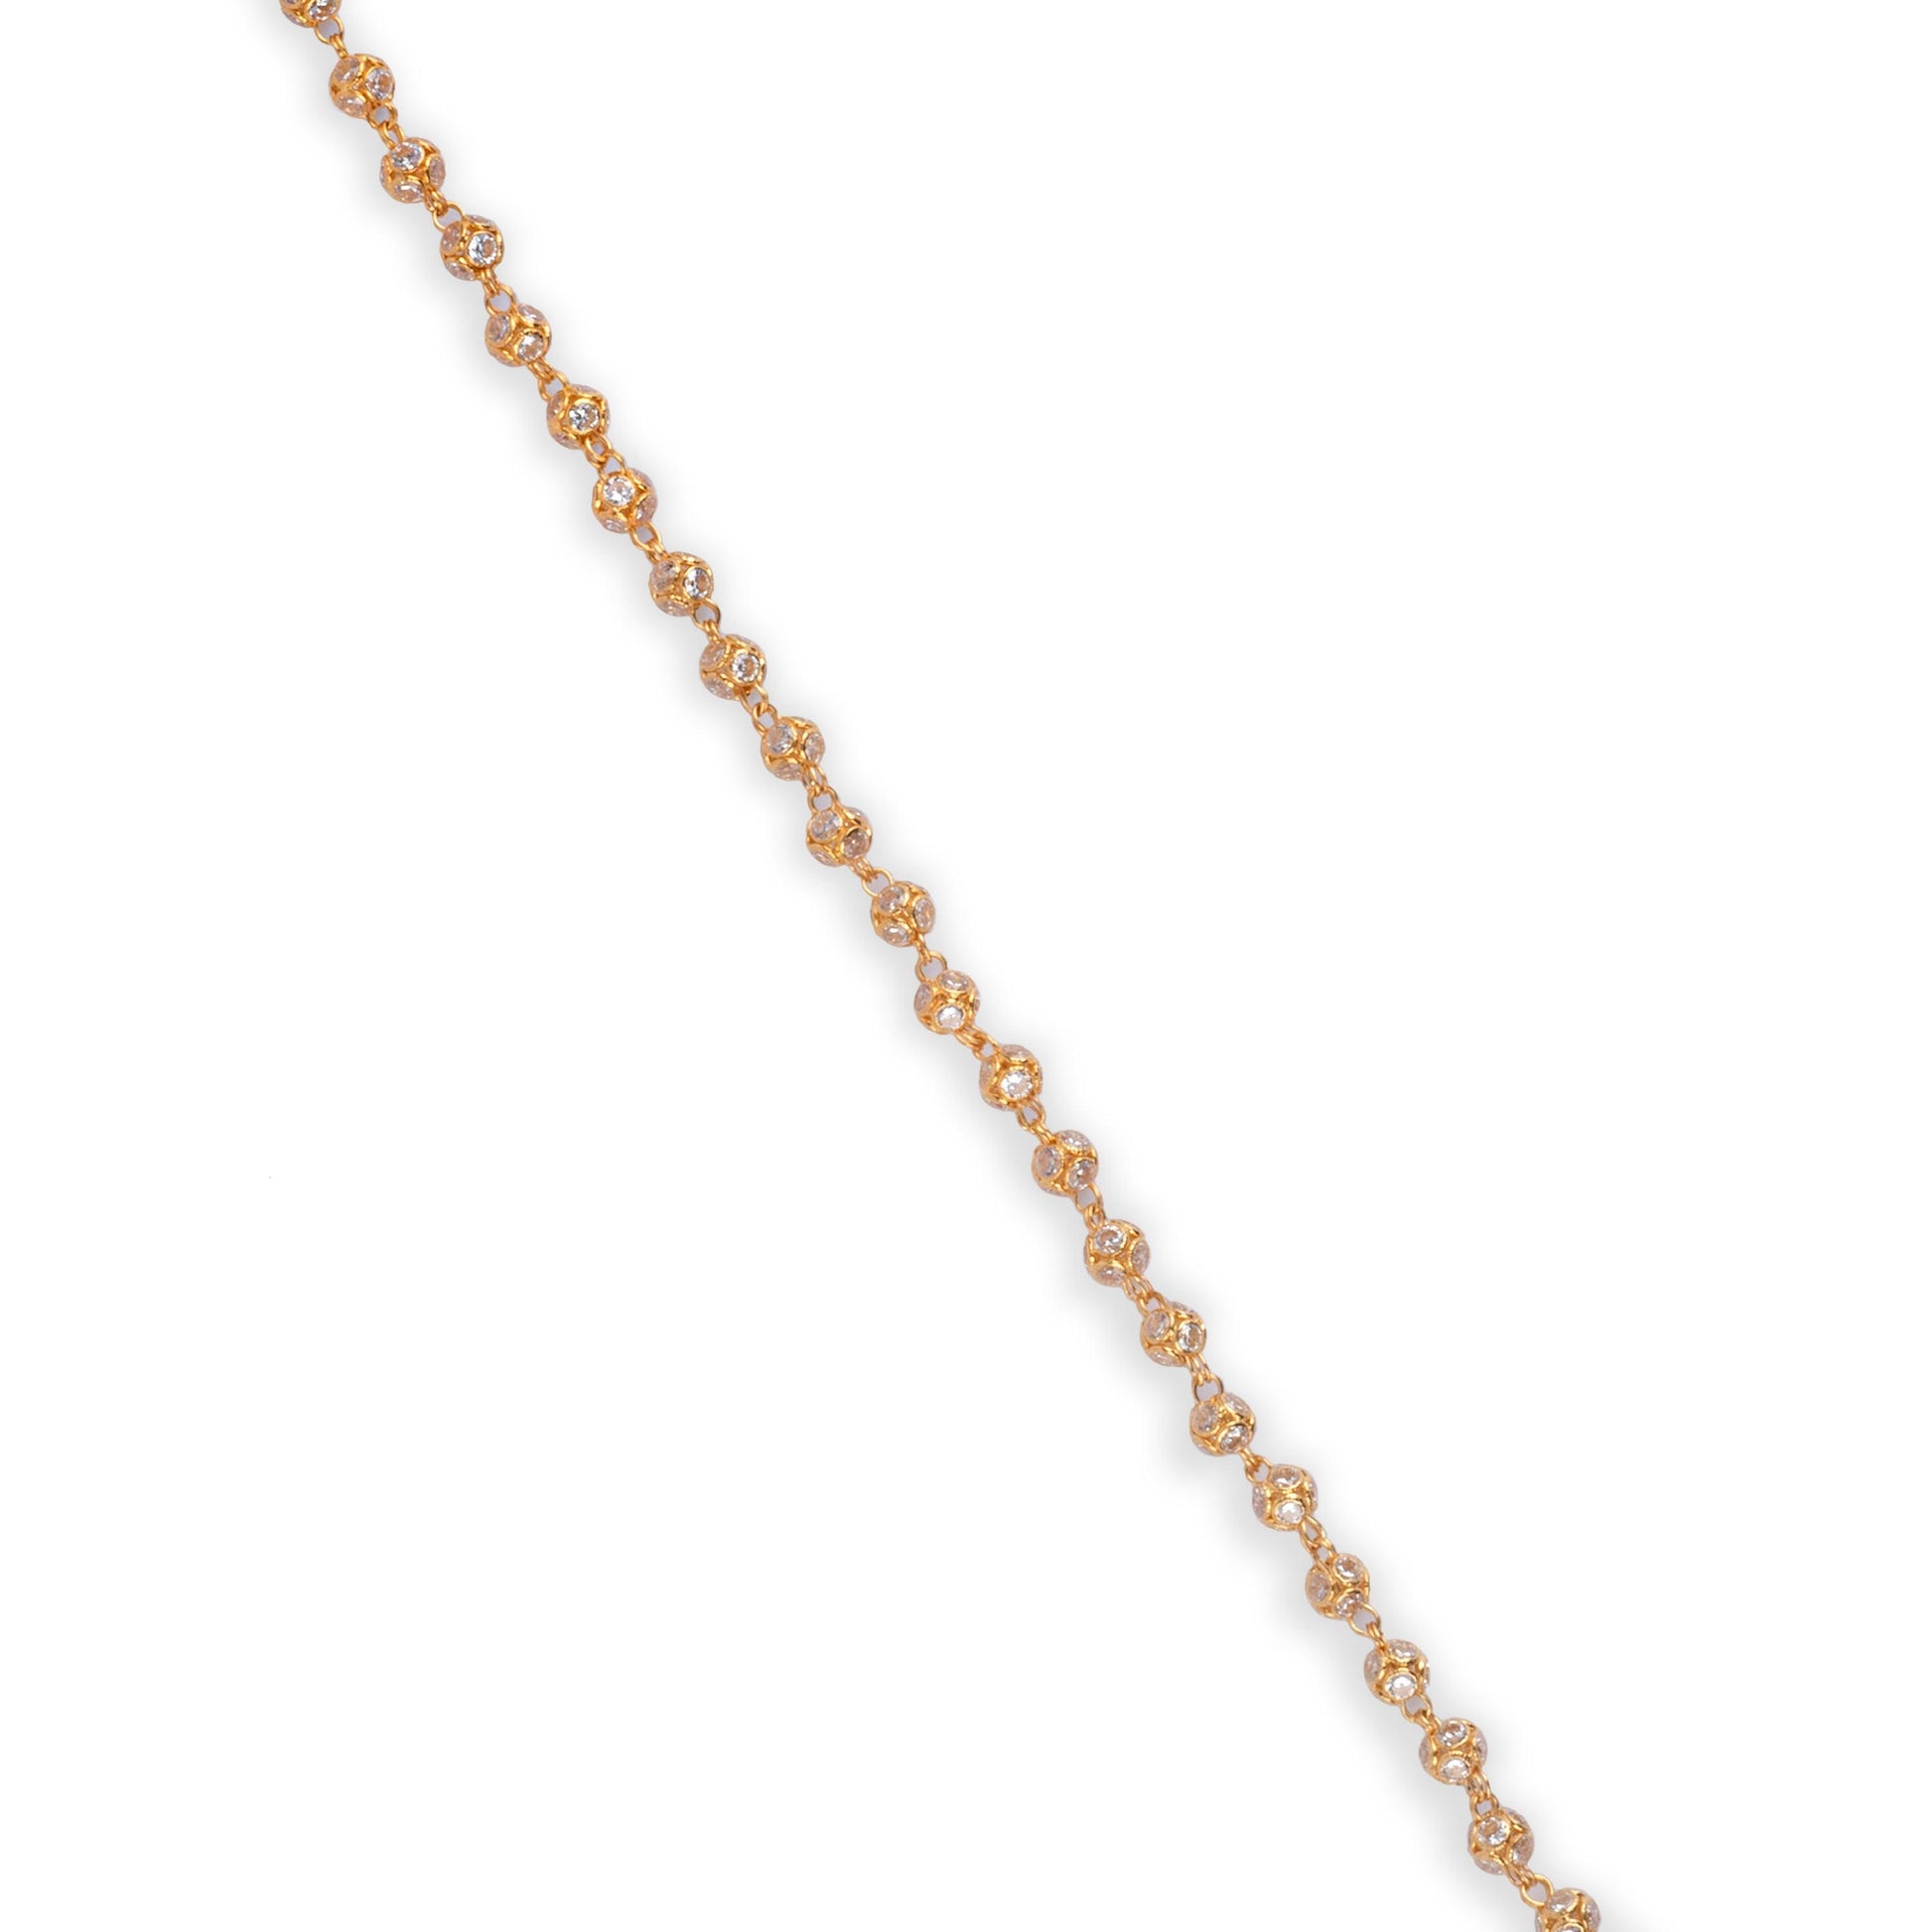 22ct Gold Beaded Bracelet with Cubic Zirconia Stones with Lobster Clasp (6.5g) LBR-7133 - Minar Jewellers